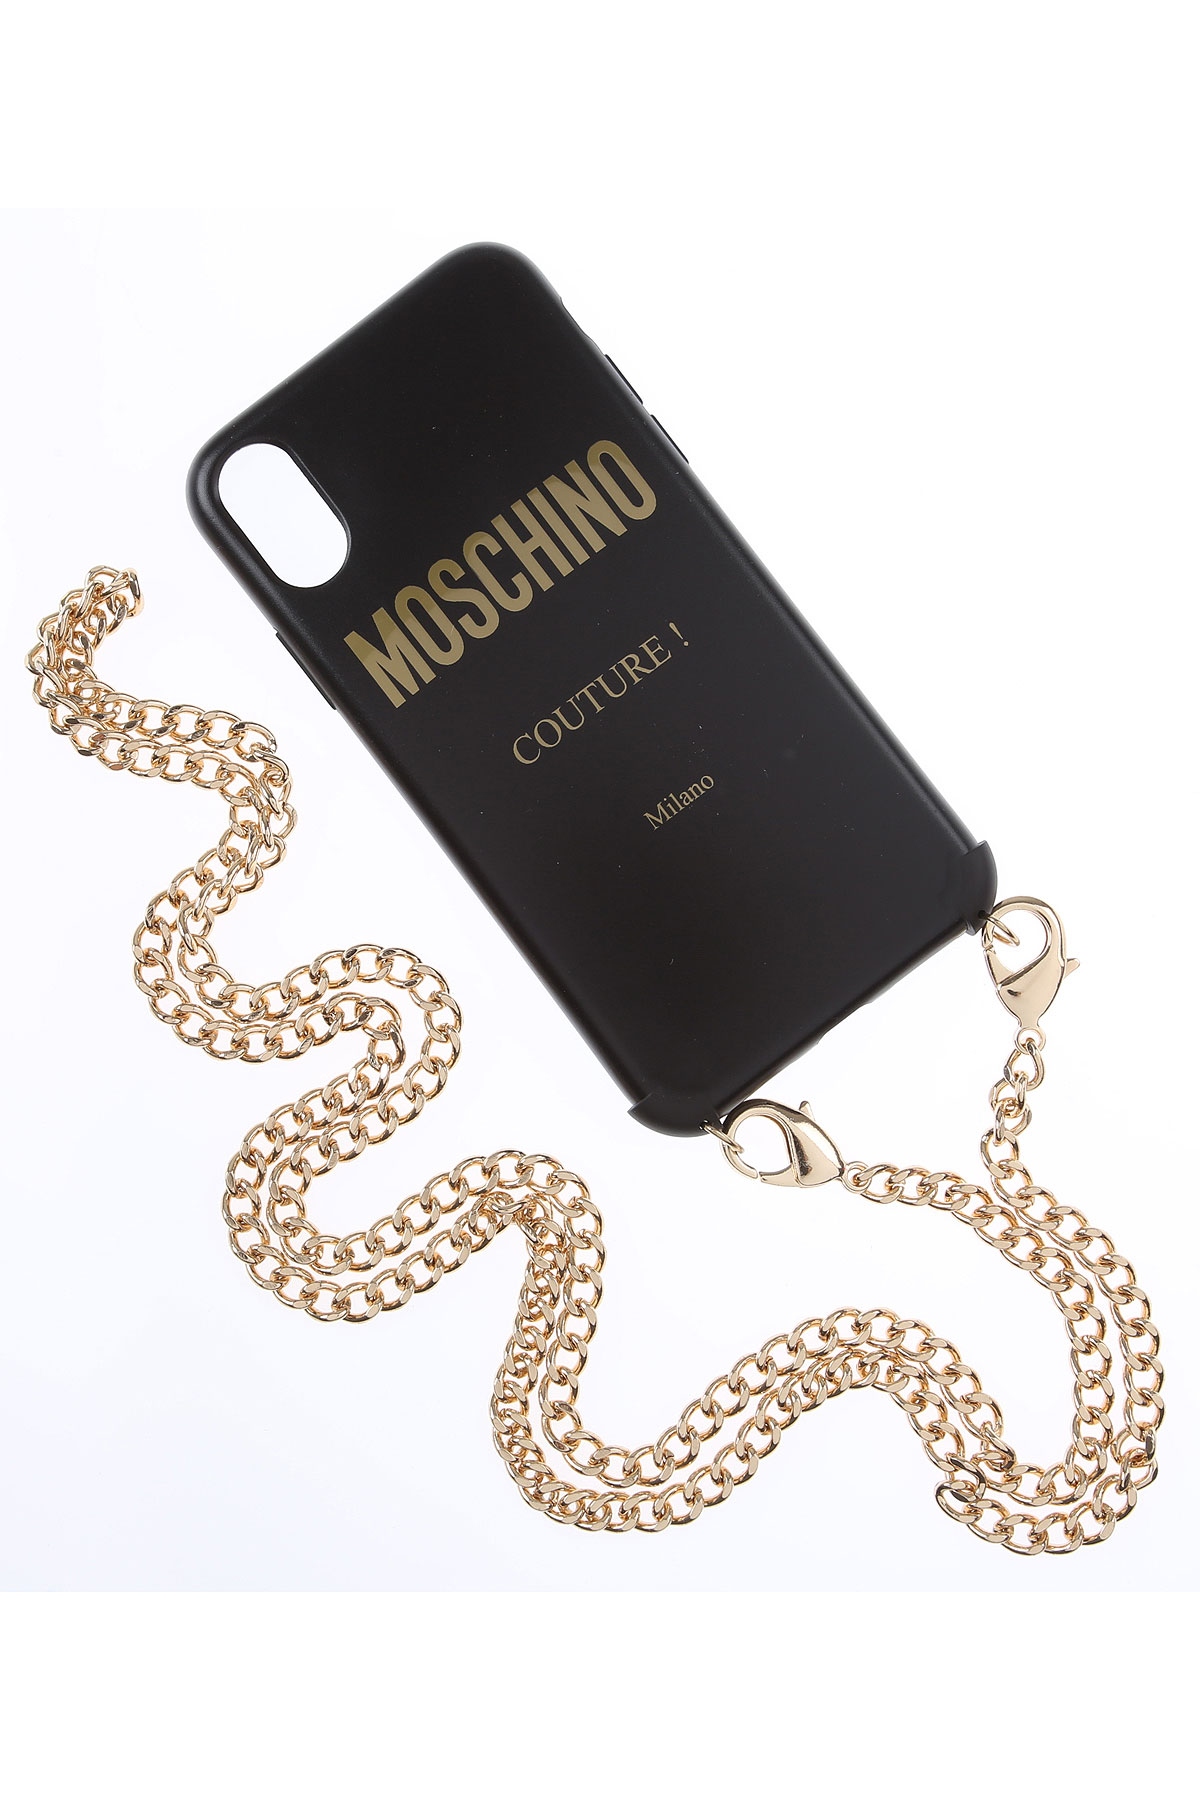 iPhone Cases Moschino, Style code: a7939-8304-2555